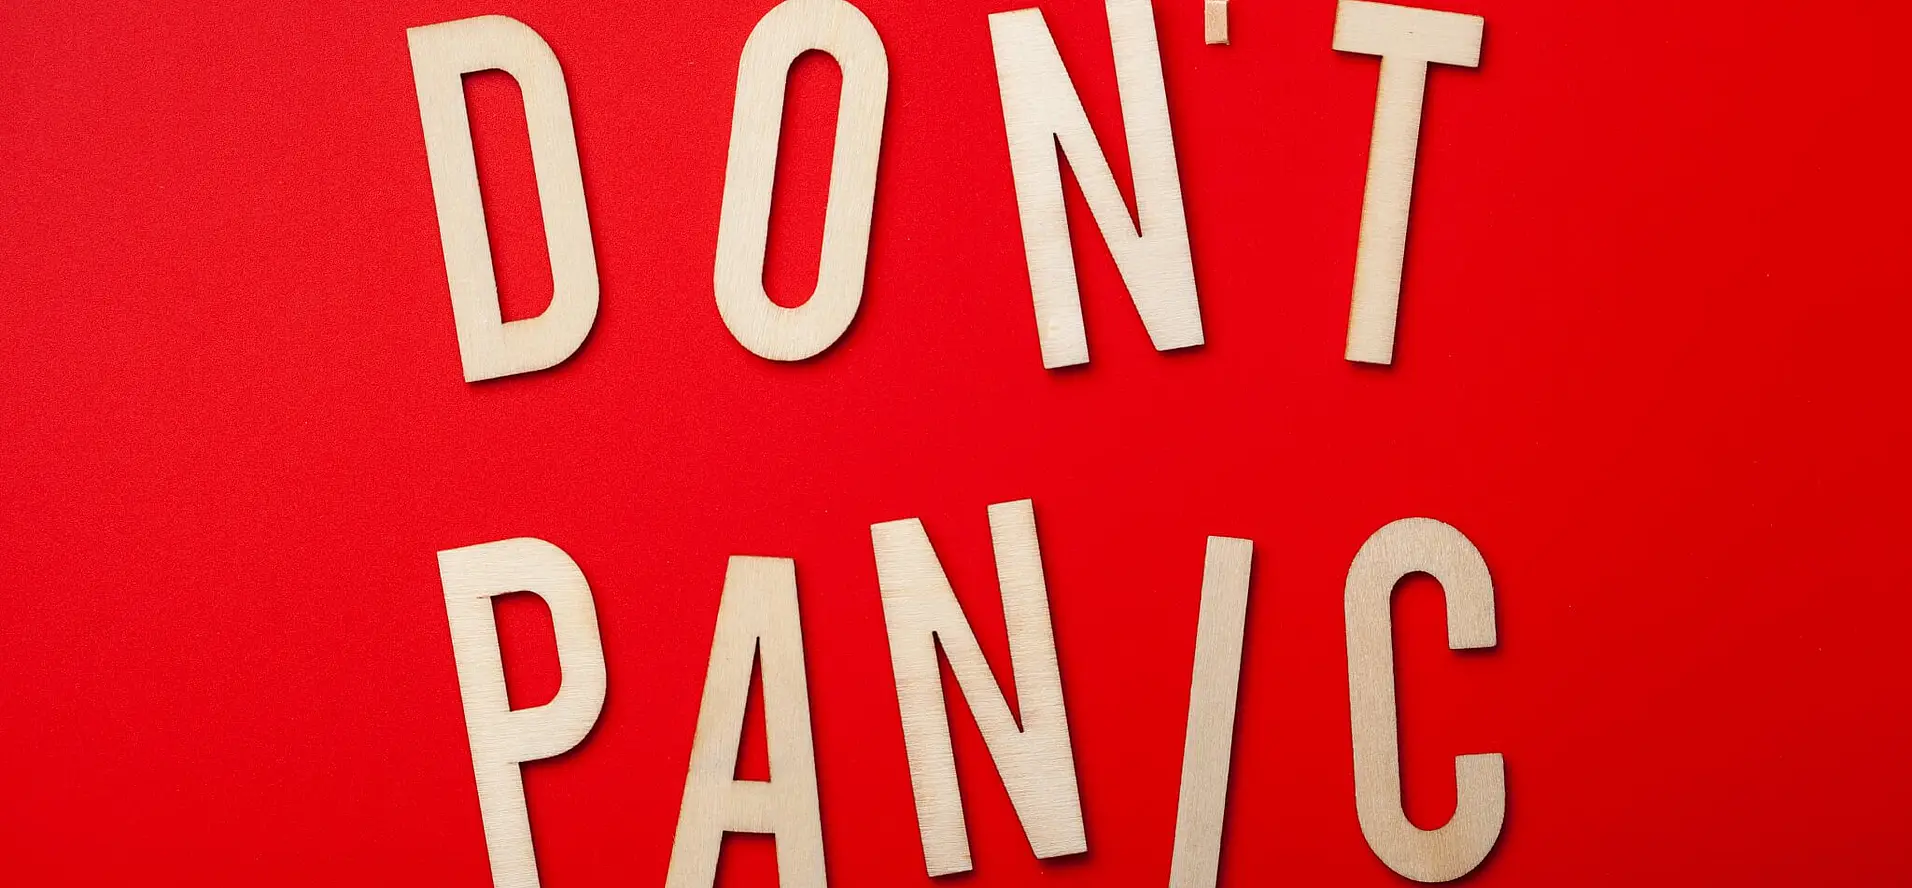 don t panic word text wooden letter on red backgro 2022 09 14 07 14 09 utc 1